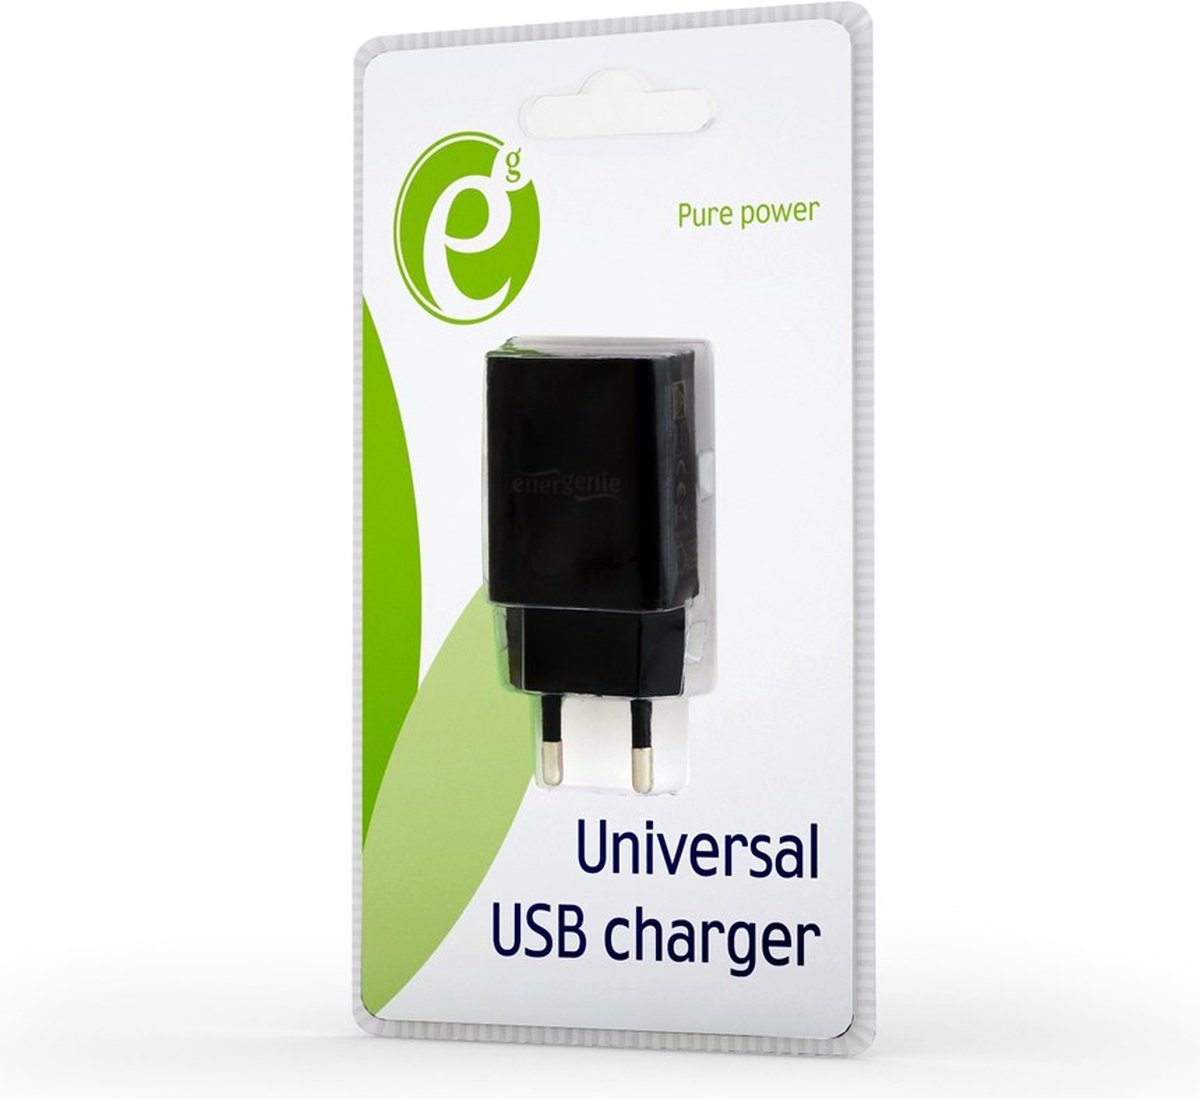 Energenie Universal USB charger, 2.1 A, black